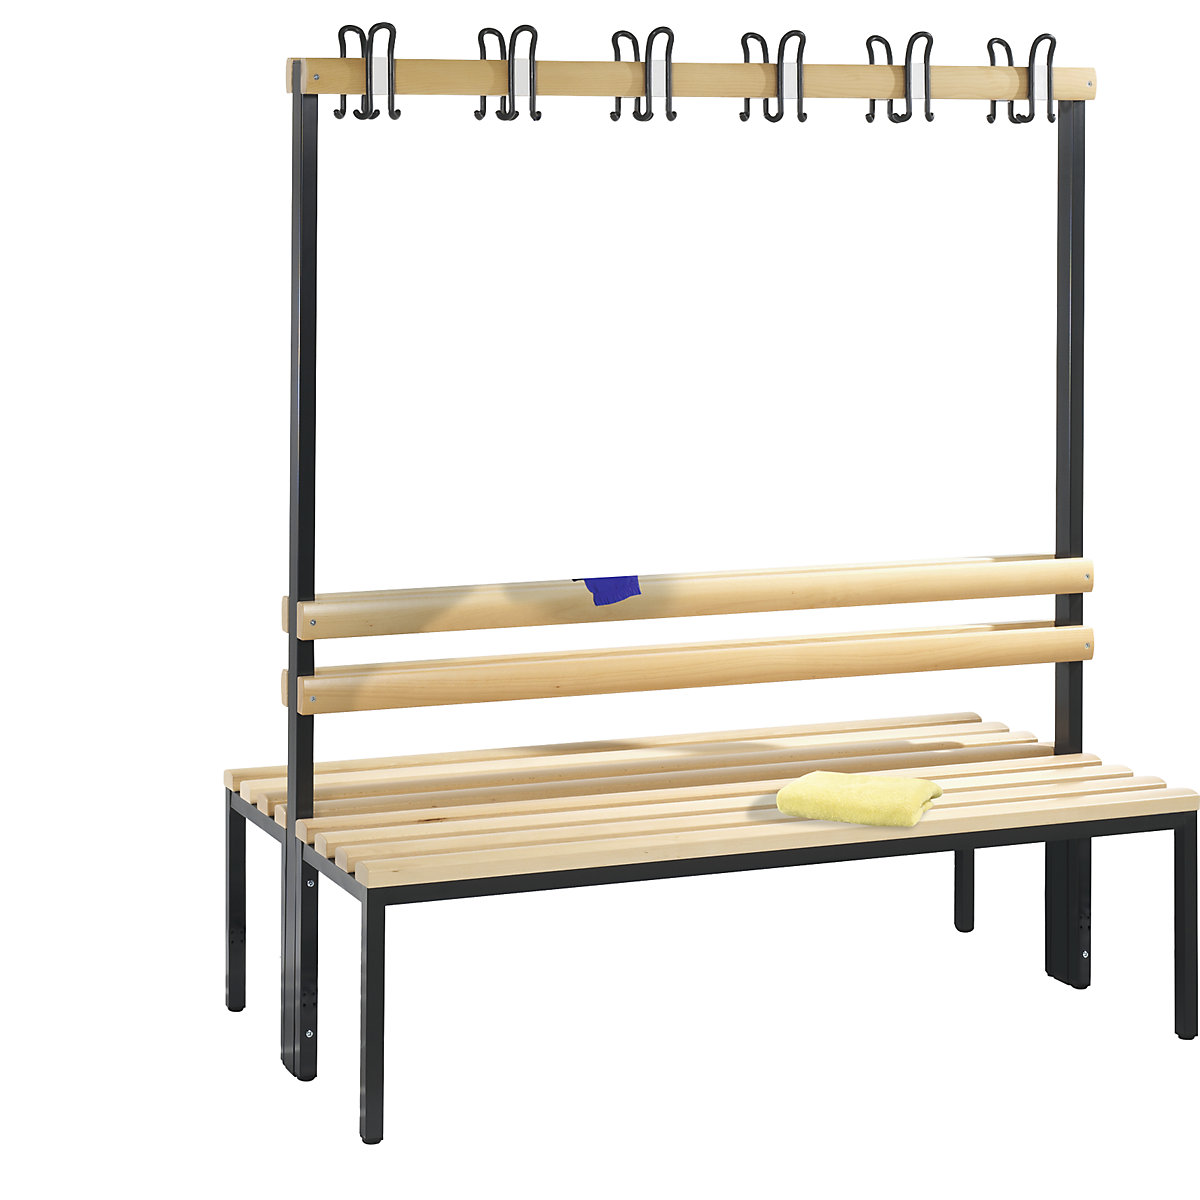 BASIC cloakroom bench, double sided – C+P, hook rail, beech, length 1500 mm-2